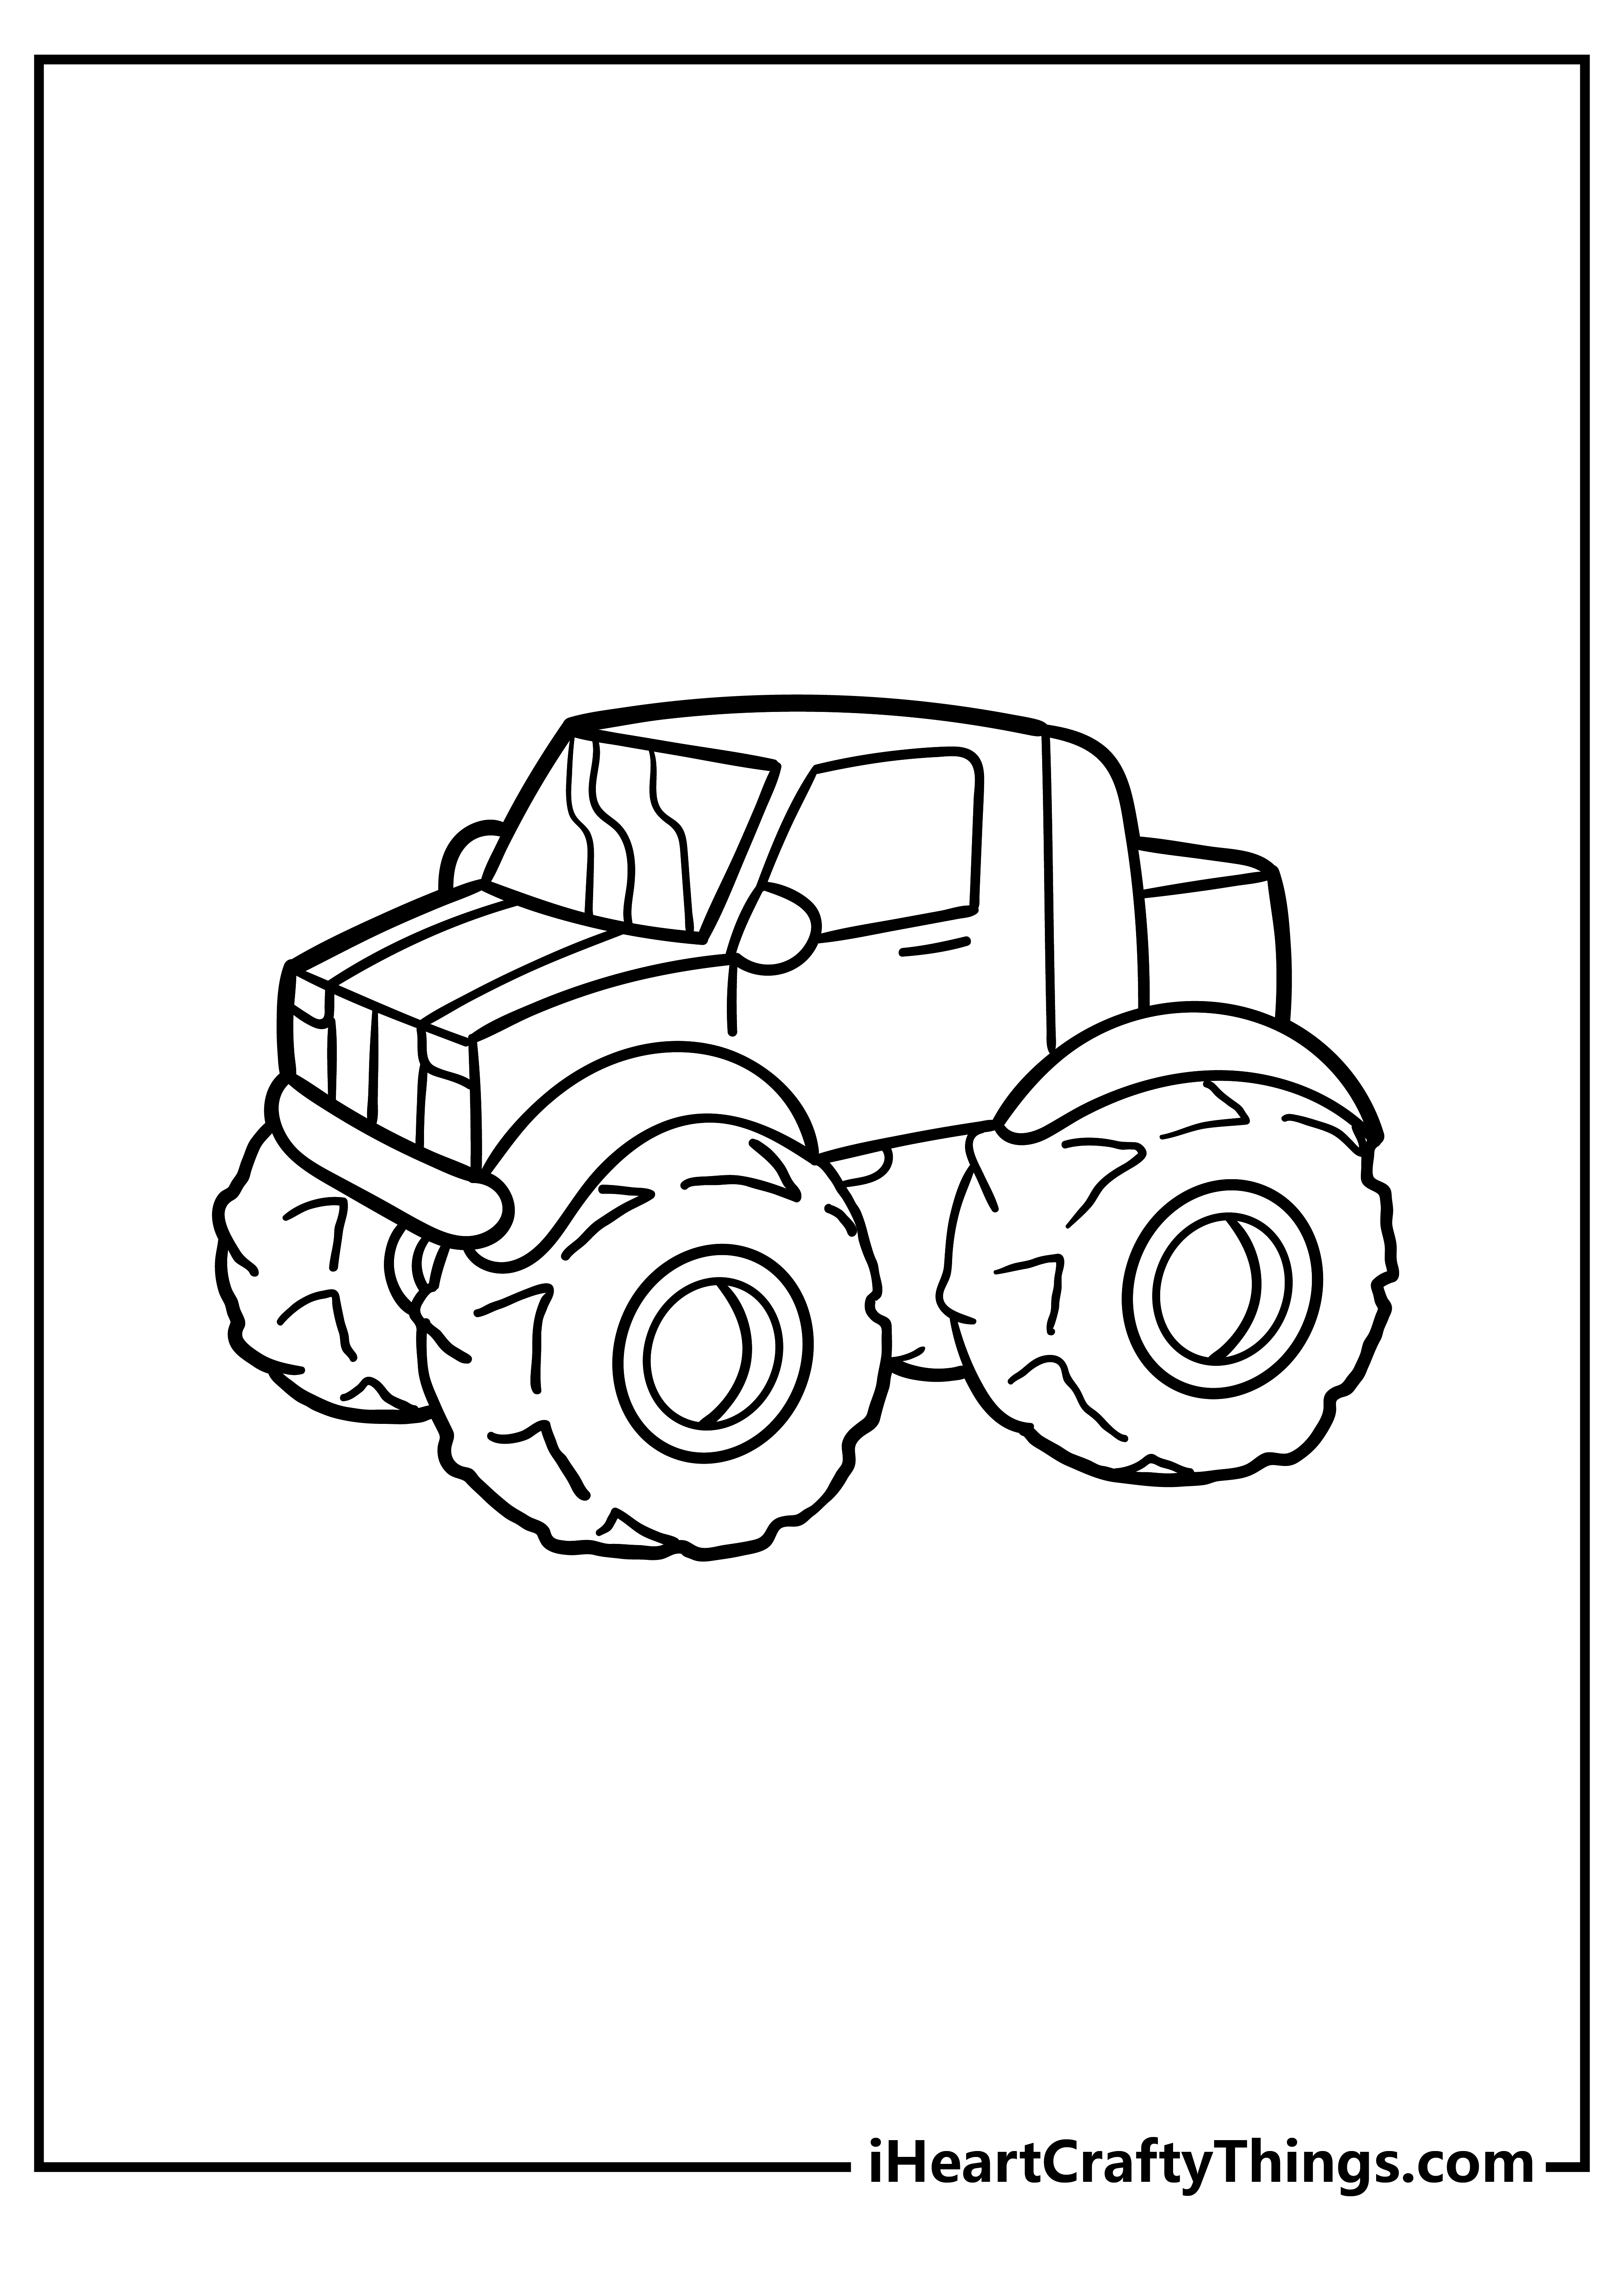 Monster Truck Coloring Sheet for children free download